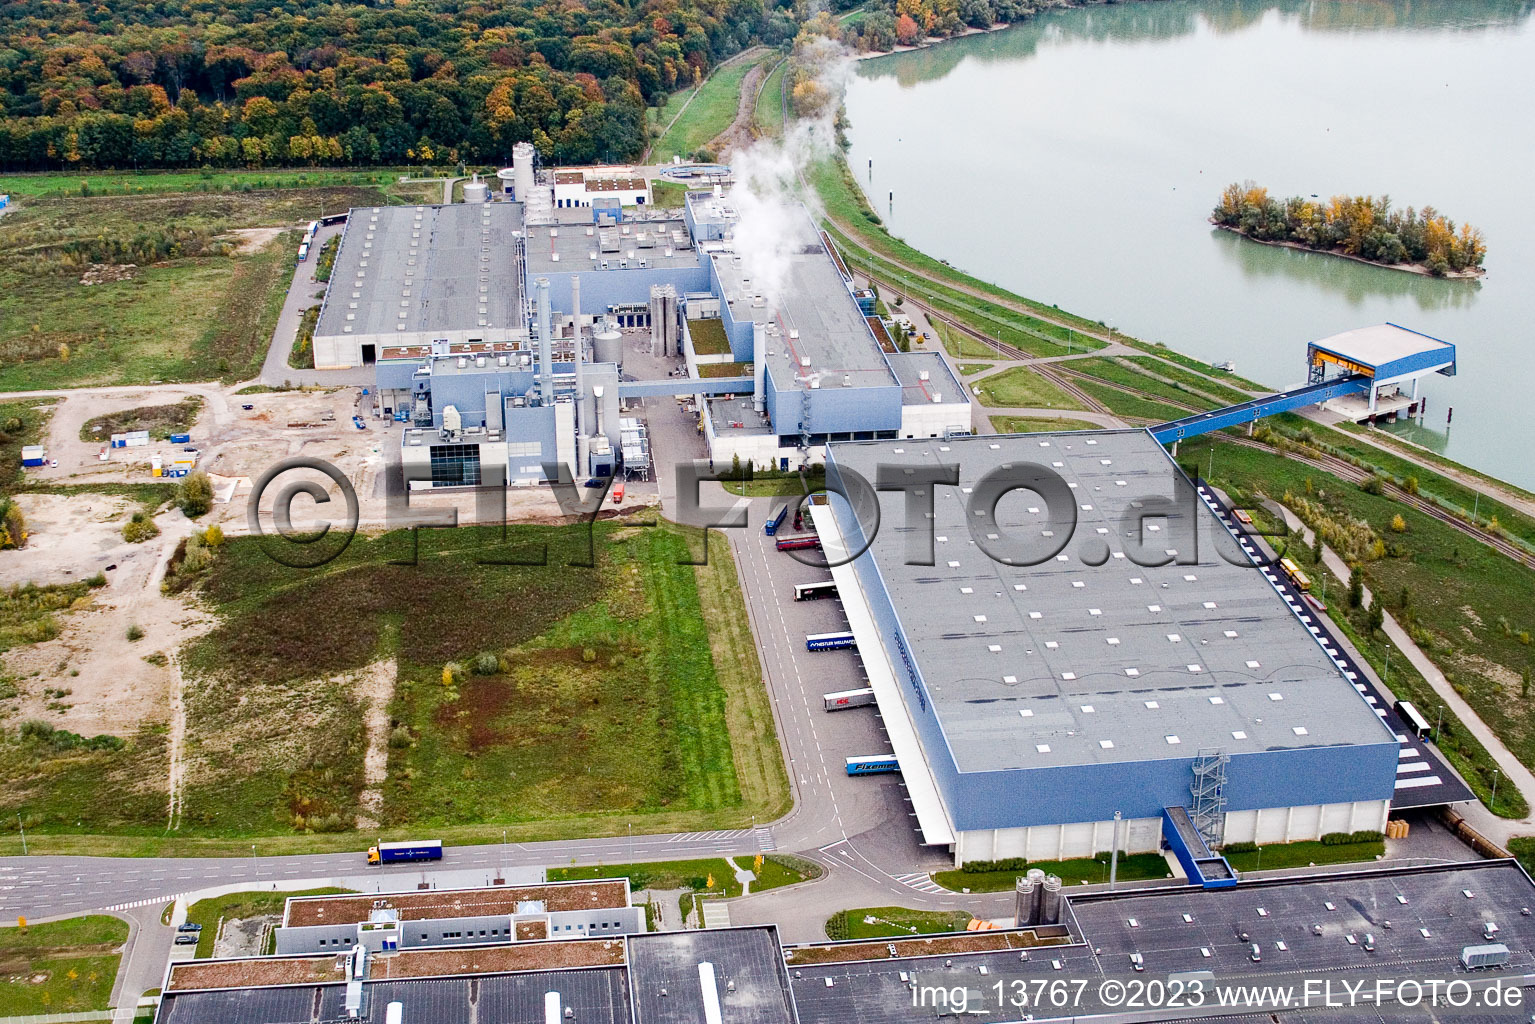 Oberwald industrial area in Wörth am Rhein in the state Rhineland-Palatinate, Germany from above